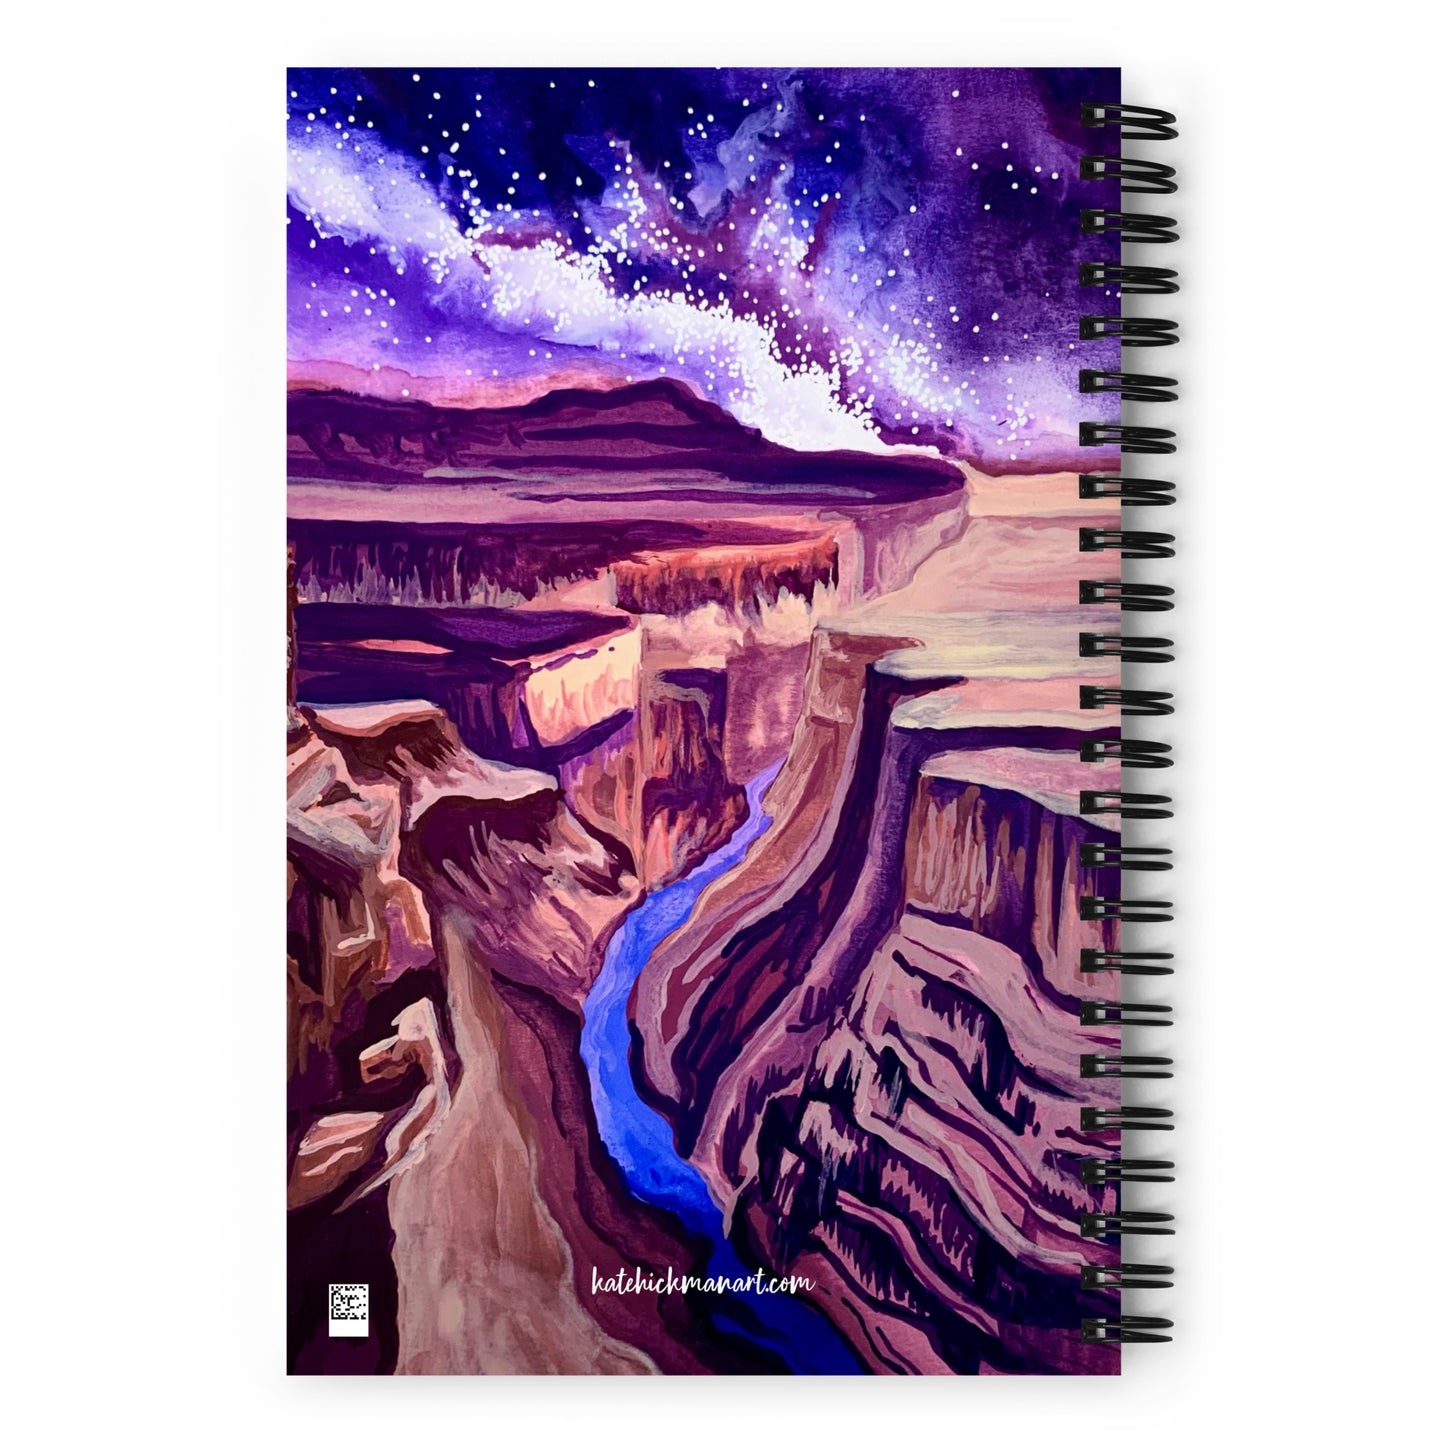 Grand Canyon National Park Notebook